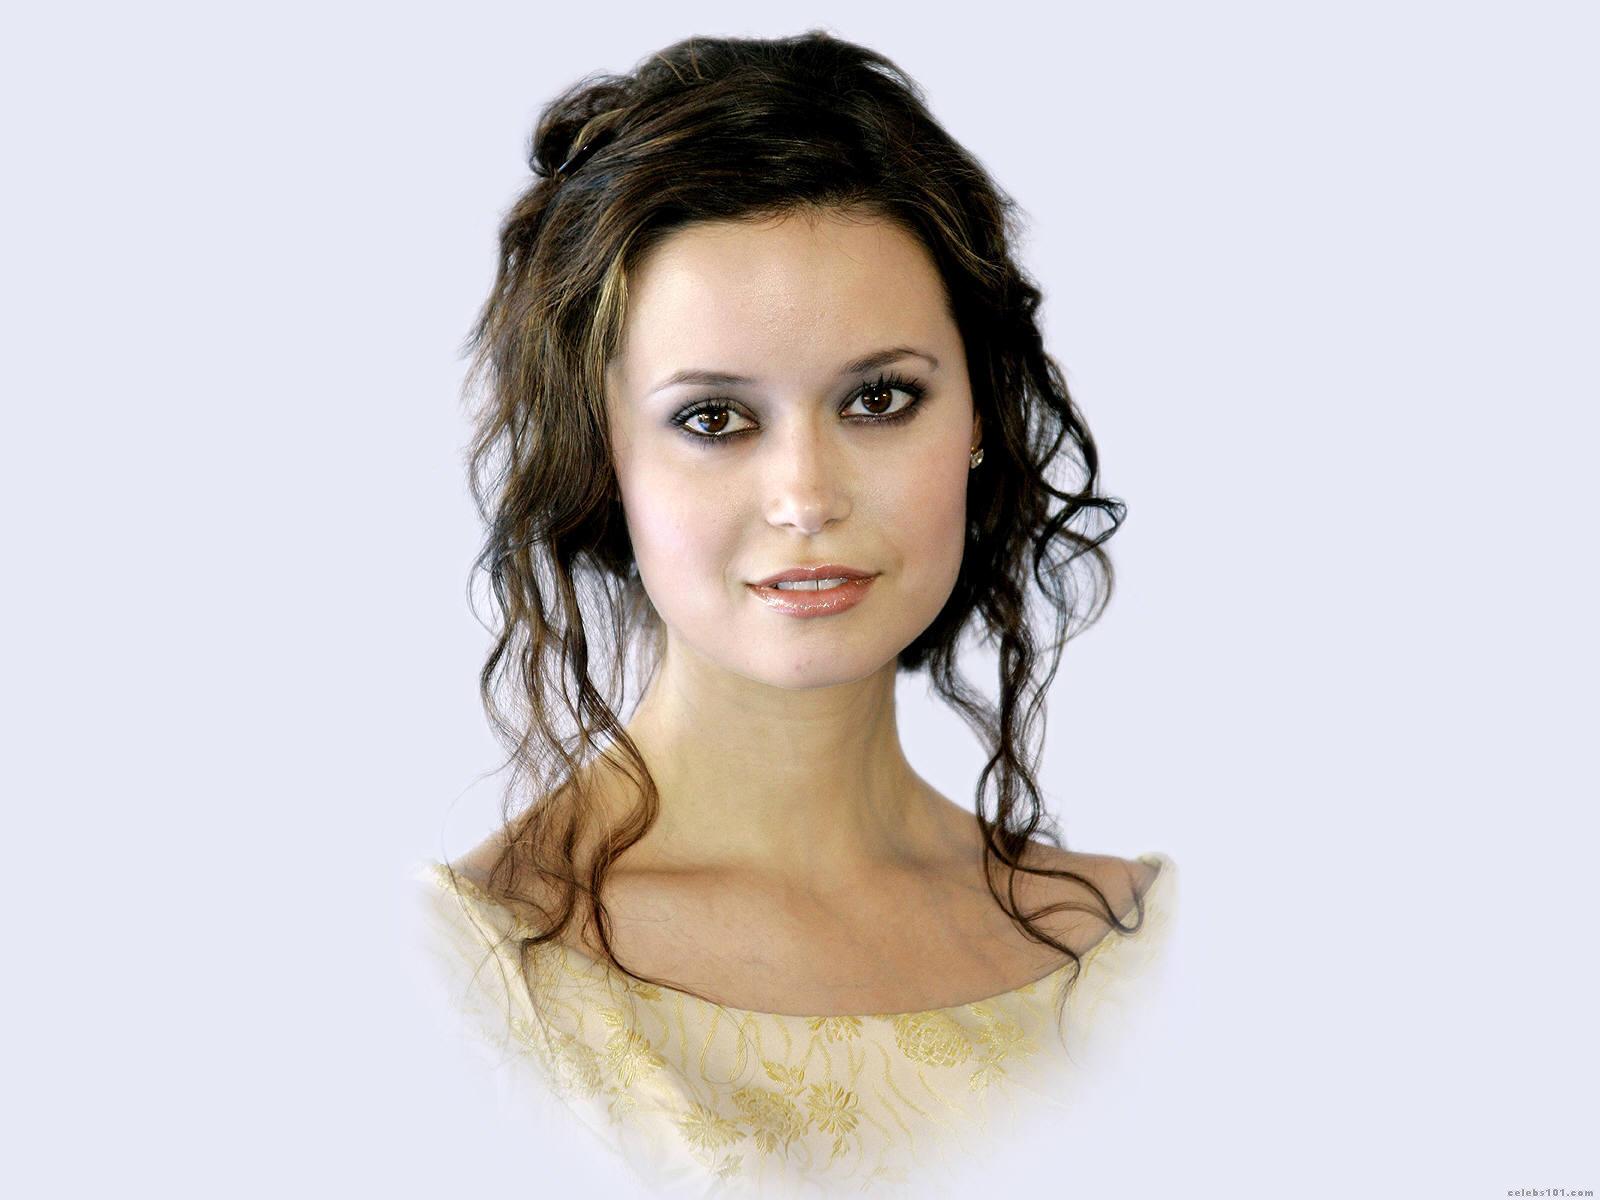 Summer Glau High Quality Wallpaper Size Of